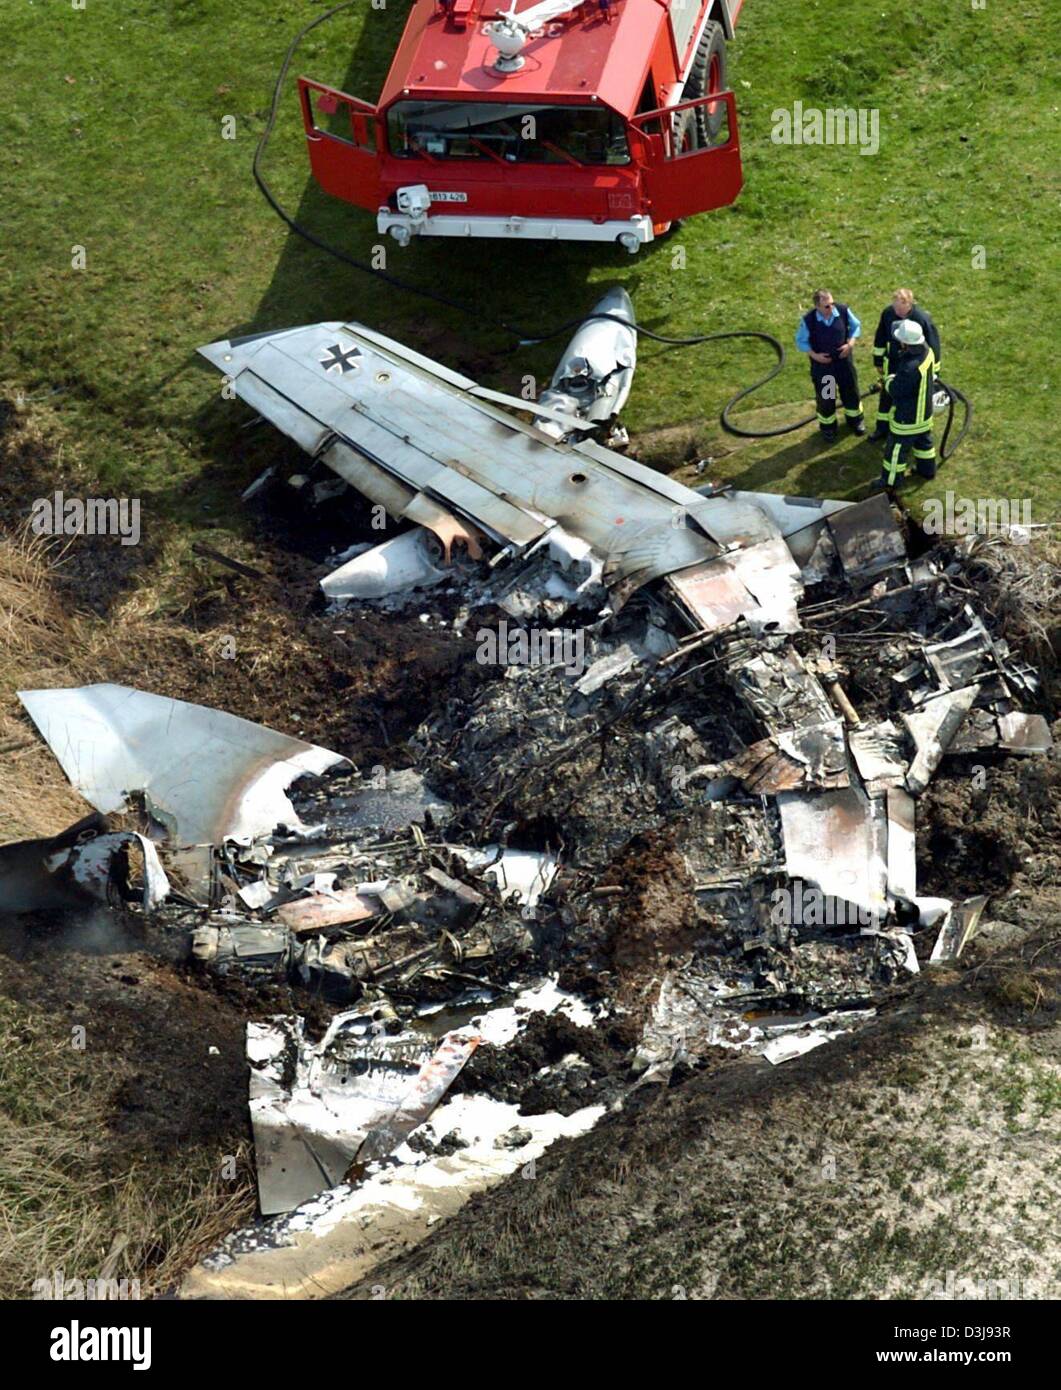 (dpa) - An aerial view of the wreckage of two German Tornado fighter jets which collided in mid-air near the town of Garding, northern Germany, on Wednesday, 21 April 2004. Two crew members were killed in the crash but two others were able to parachute to safety, police said. Stock Photo